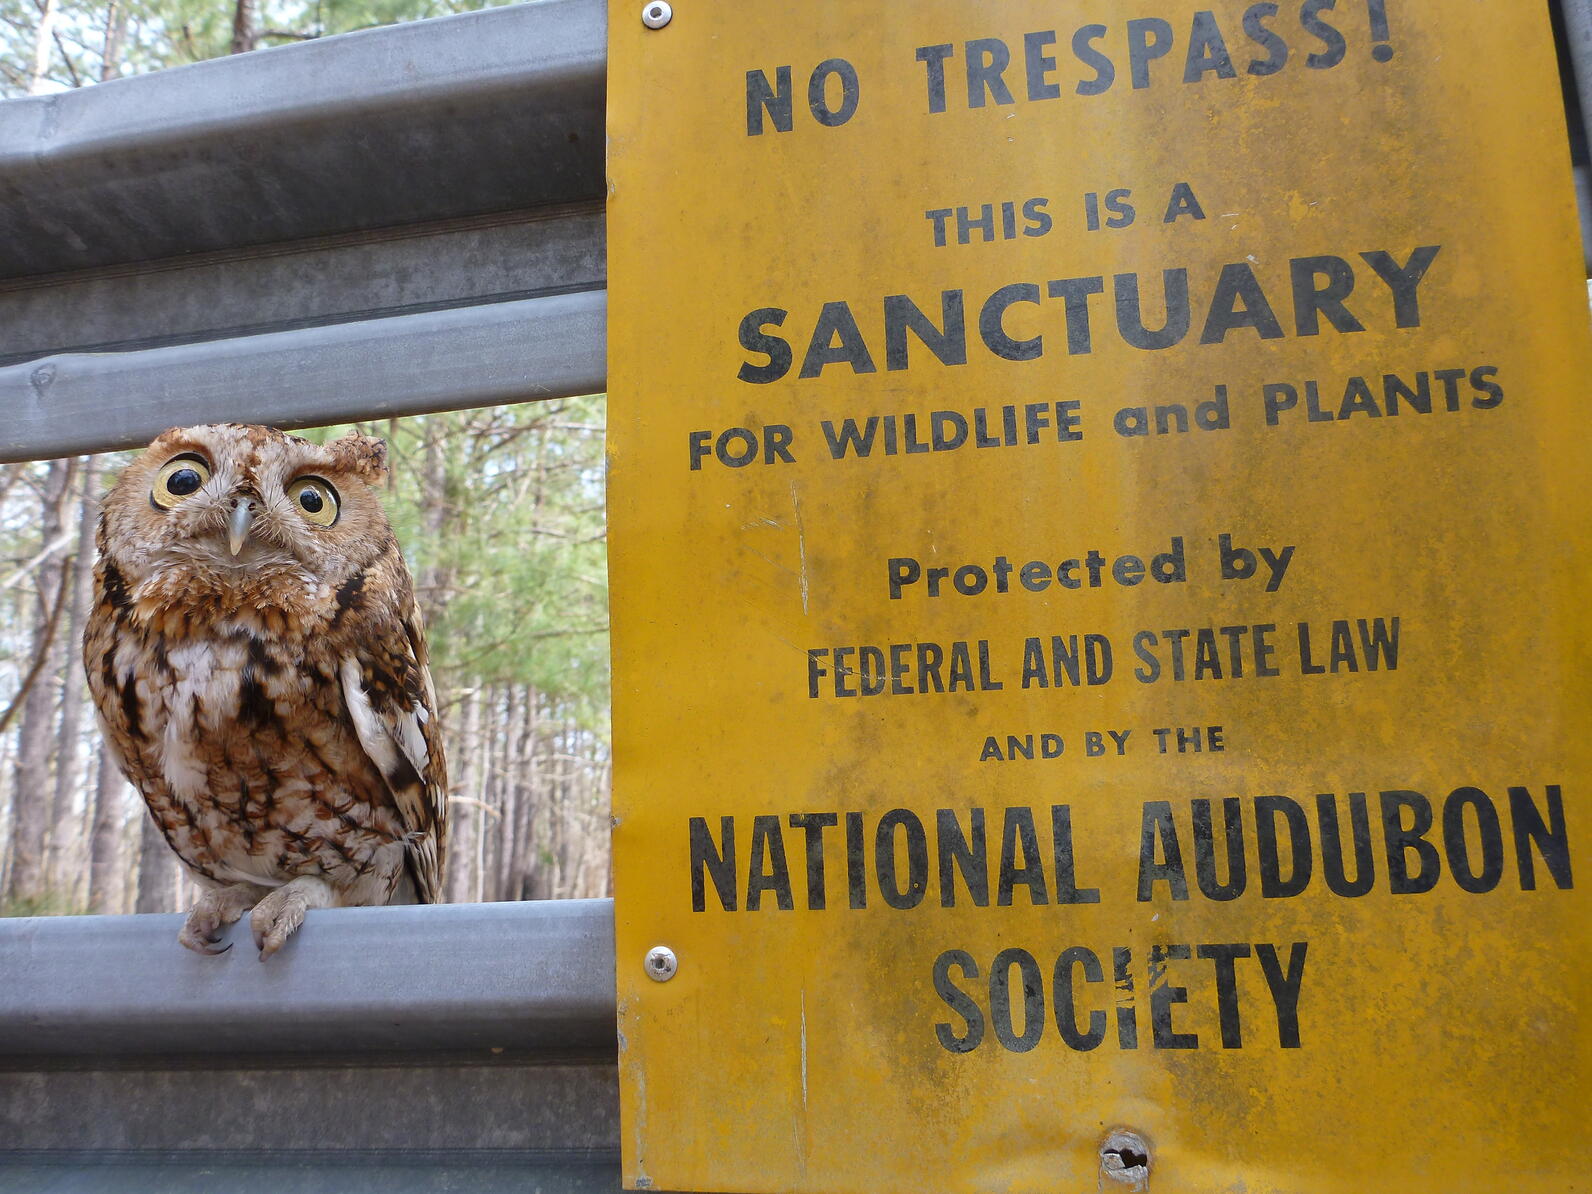 A Screech Owl sits on a metal gate next to a sign that says "Sanctuary for wildlife and plants. Protected by federal and state law and by the National Audubon Society." Is the owl judging you?